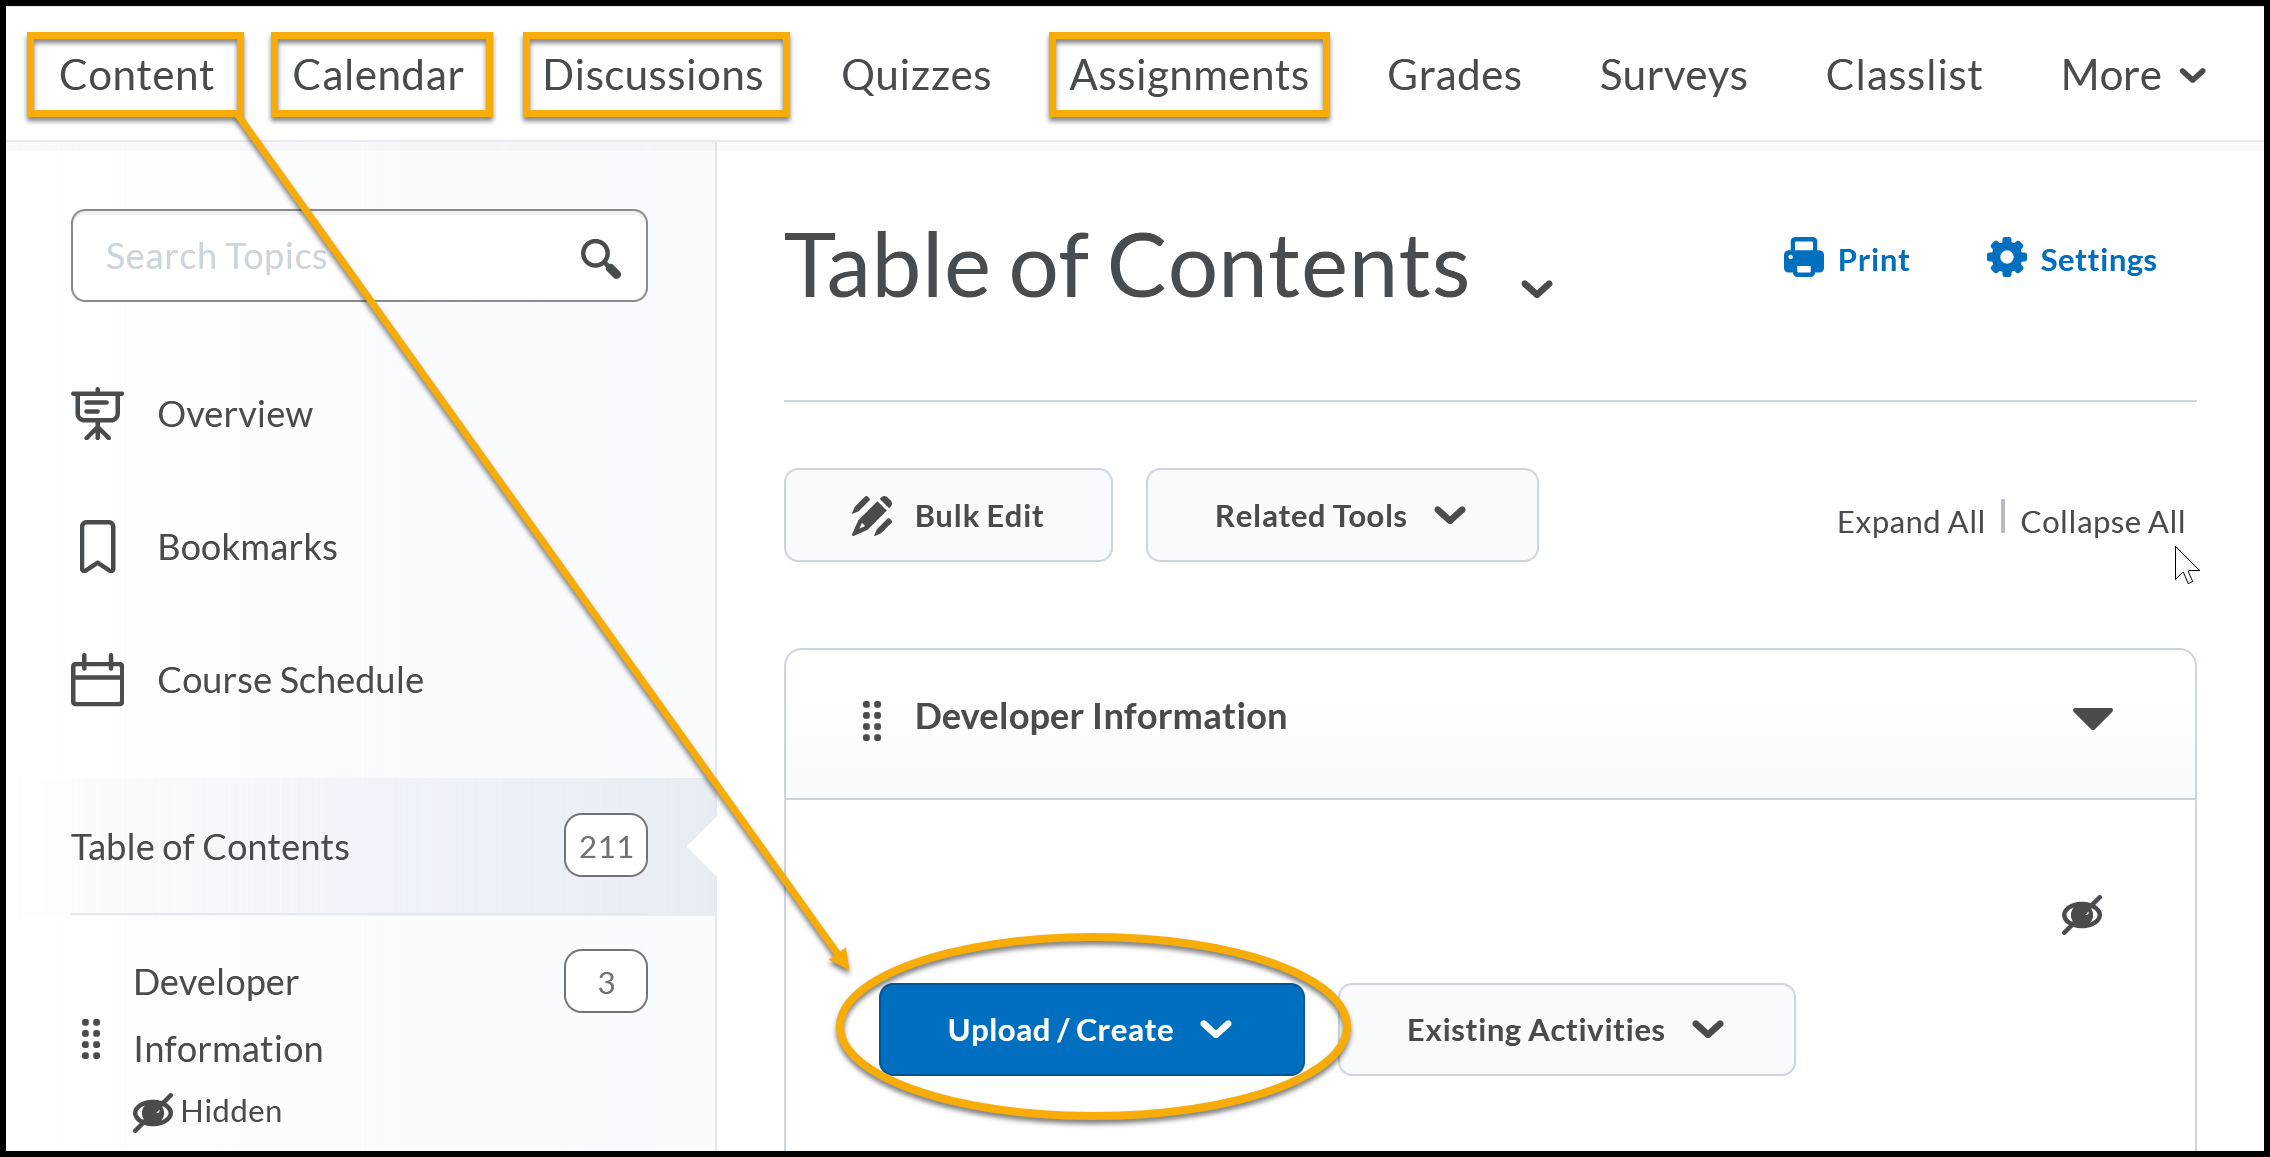 Content, Calendar, Discussions, and Assignments highlighted with arrow to Upload / Create